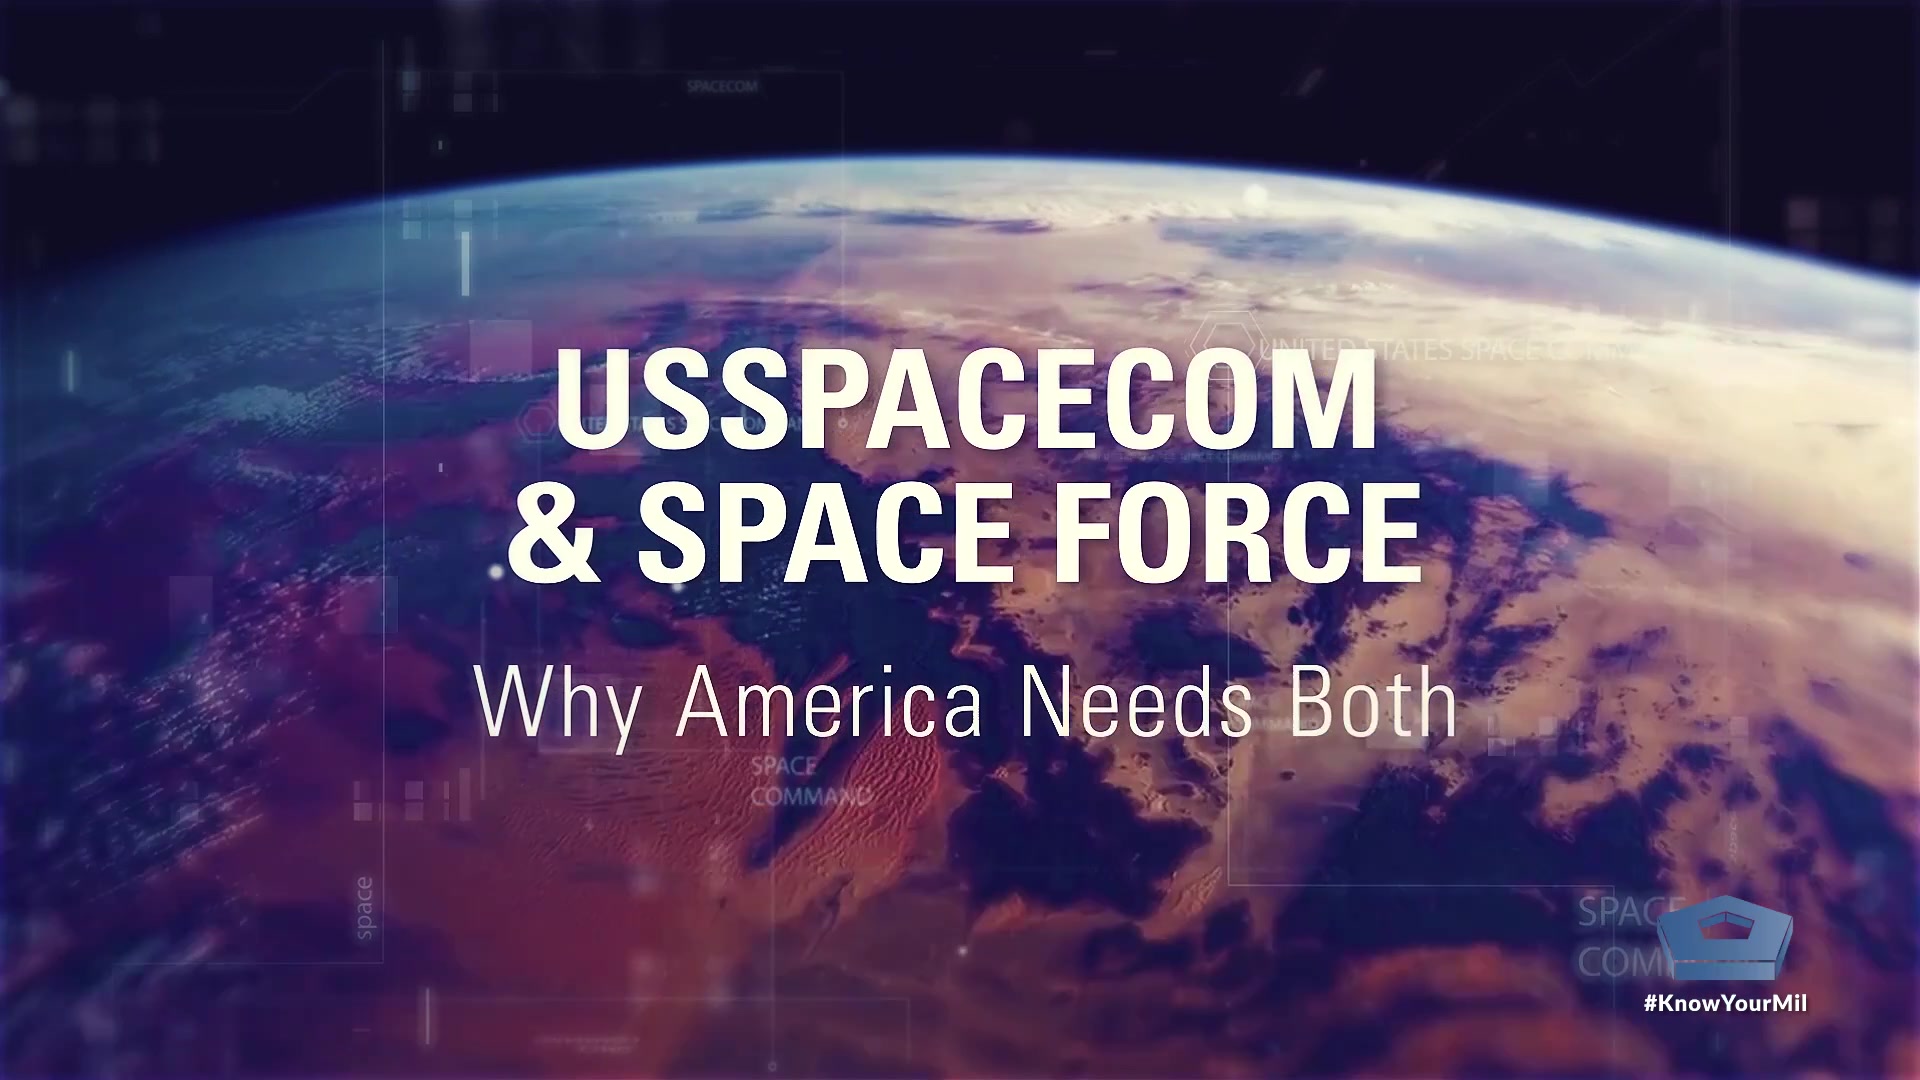 U.S. Space Command was activated Aug. 29, 2019, becoming the nation’s 11th combatant command. In addition to discussing the command’s mission, this video highlights the foundational differences between a military branch and a combatant command. The establishment of U.S. Space Command aims to enhance the nation’s space superiority and protect and defend U.S. interests in space.   

Video by Air Force Staff Sgt. Dennis Hoffman